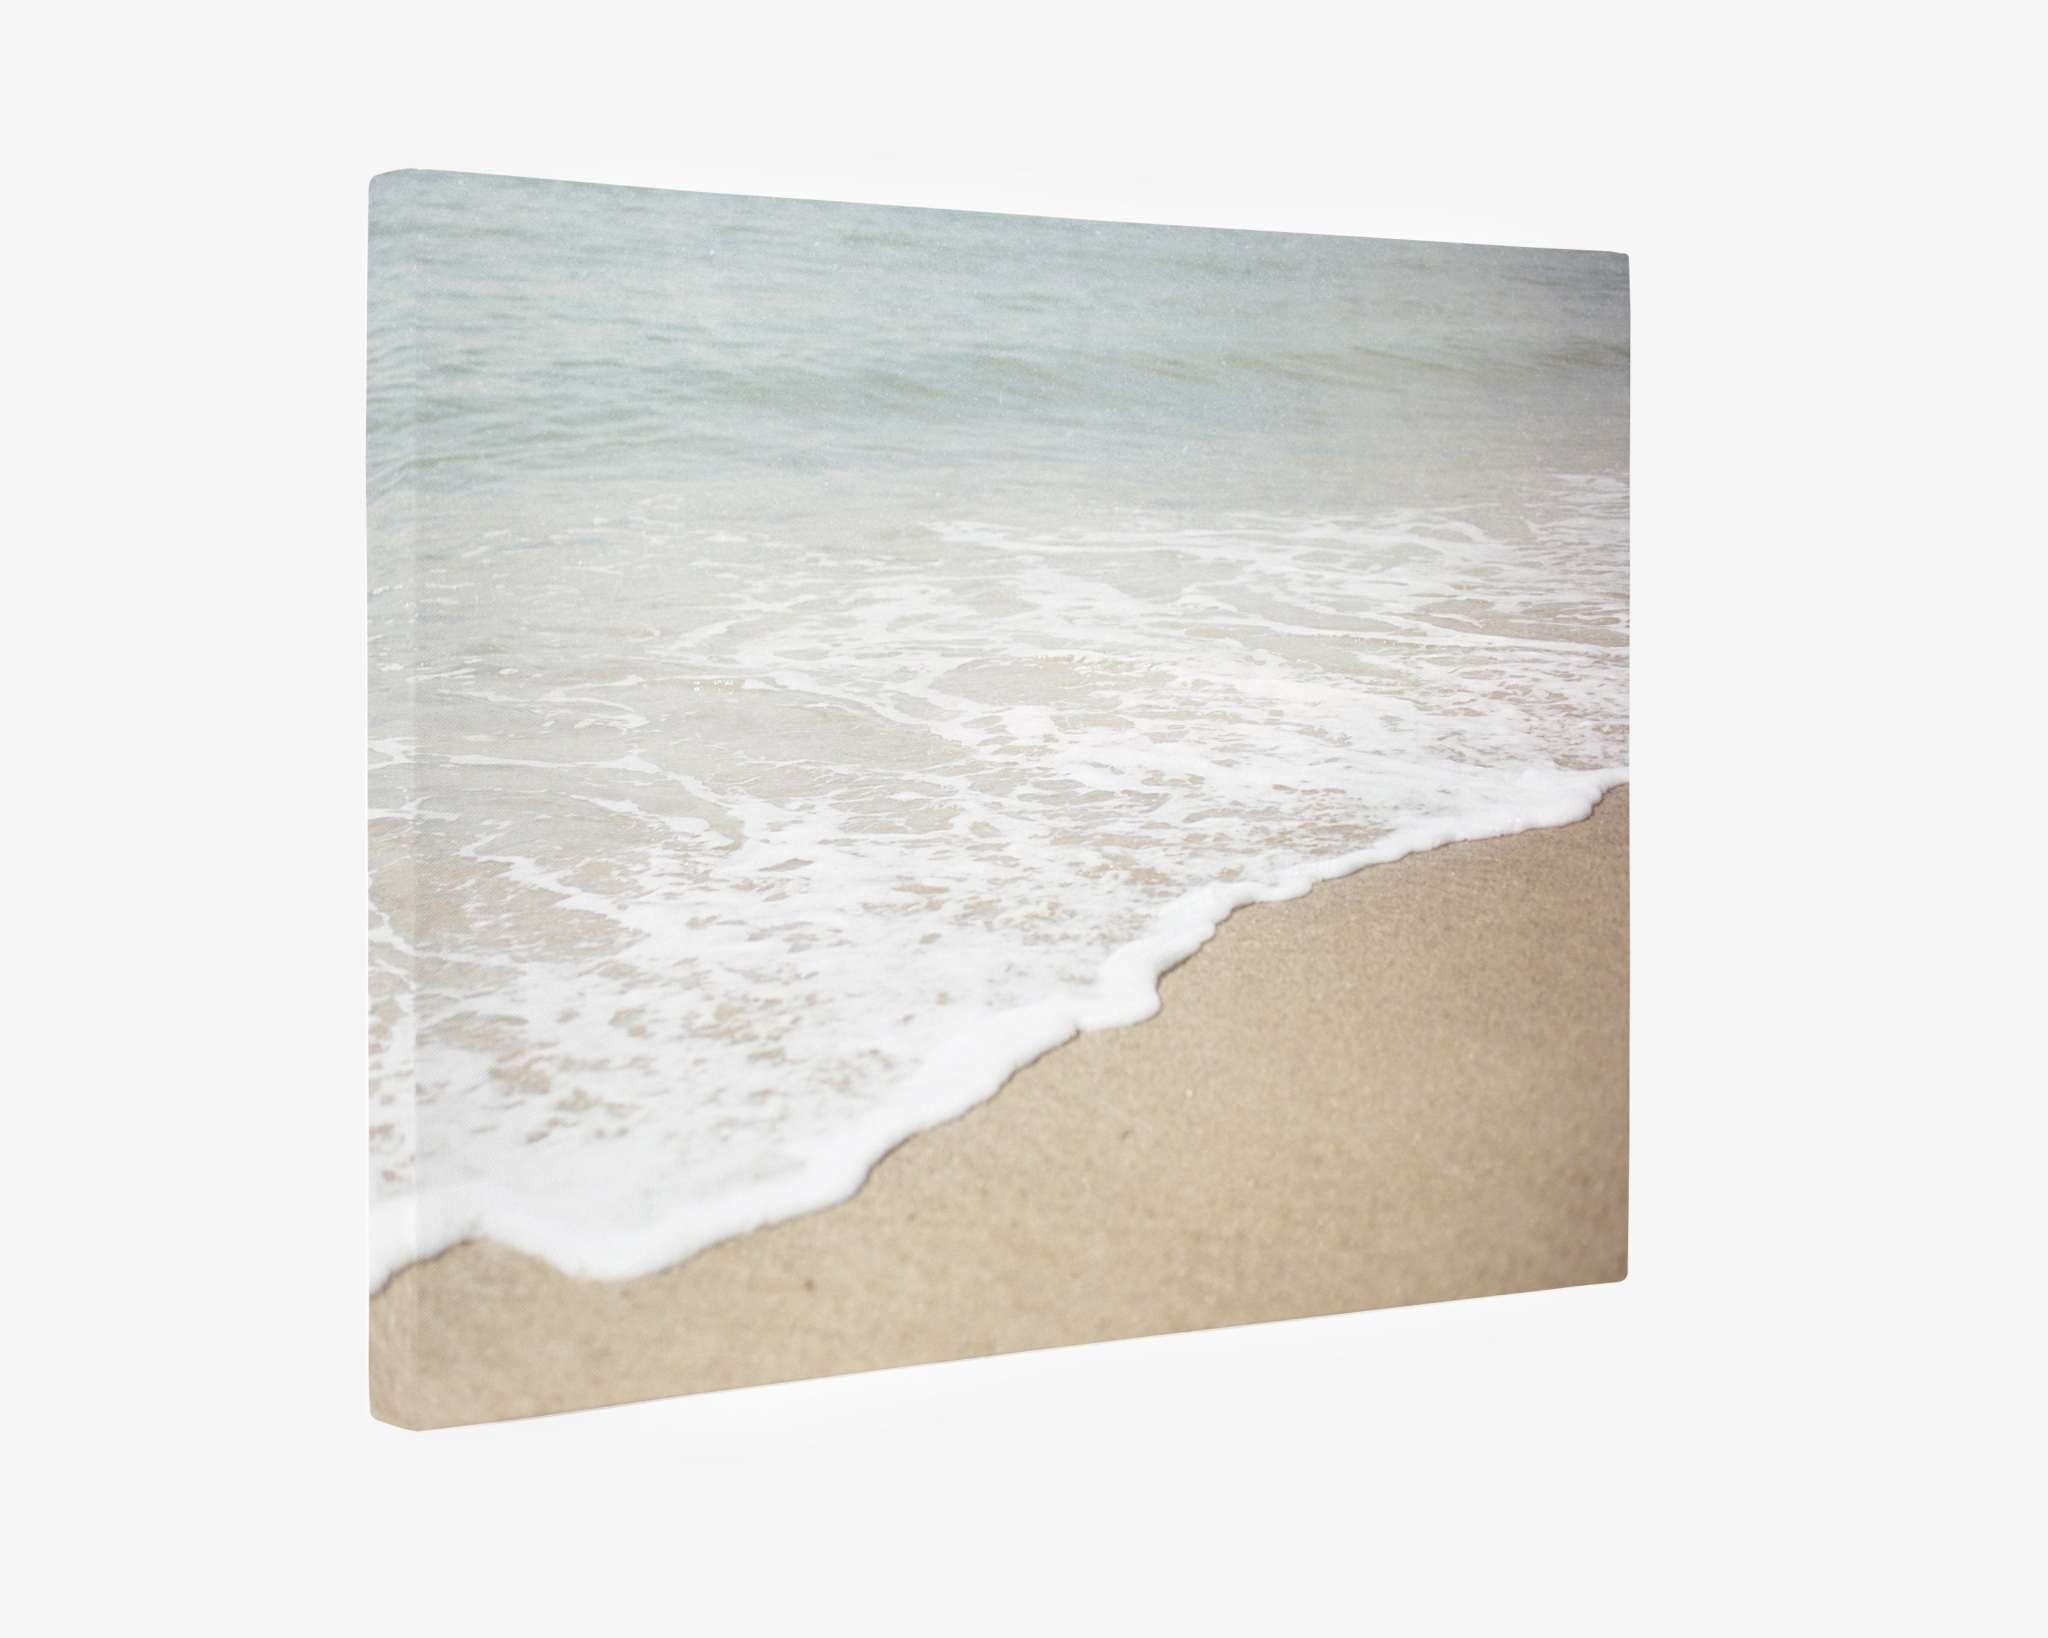 A minimalist artwork depicting gentle ocean waves lapping against the sandy shores of Will Rogers State Beach, mounted on a premium artist-grade canvas. The colors are soft and muted, creating a serene and calming visual effect. This is the Beach Waves Canvas Wall Art, &#39;Chasing Surf&#39; by Offley Green.